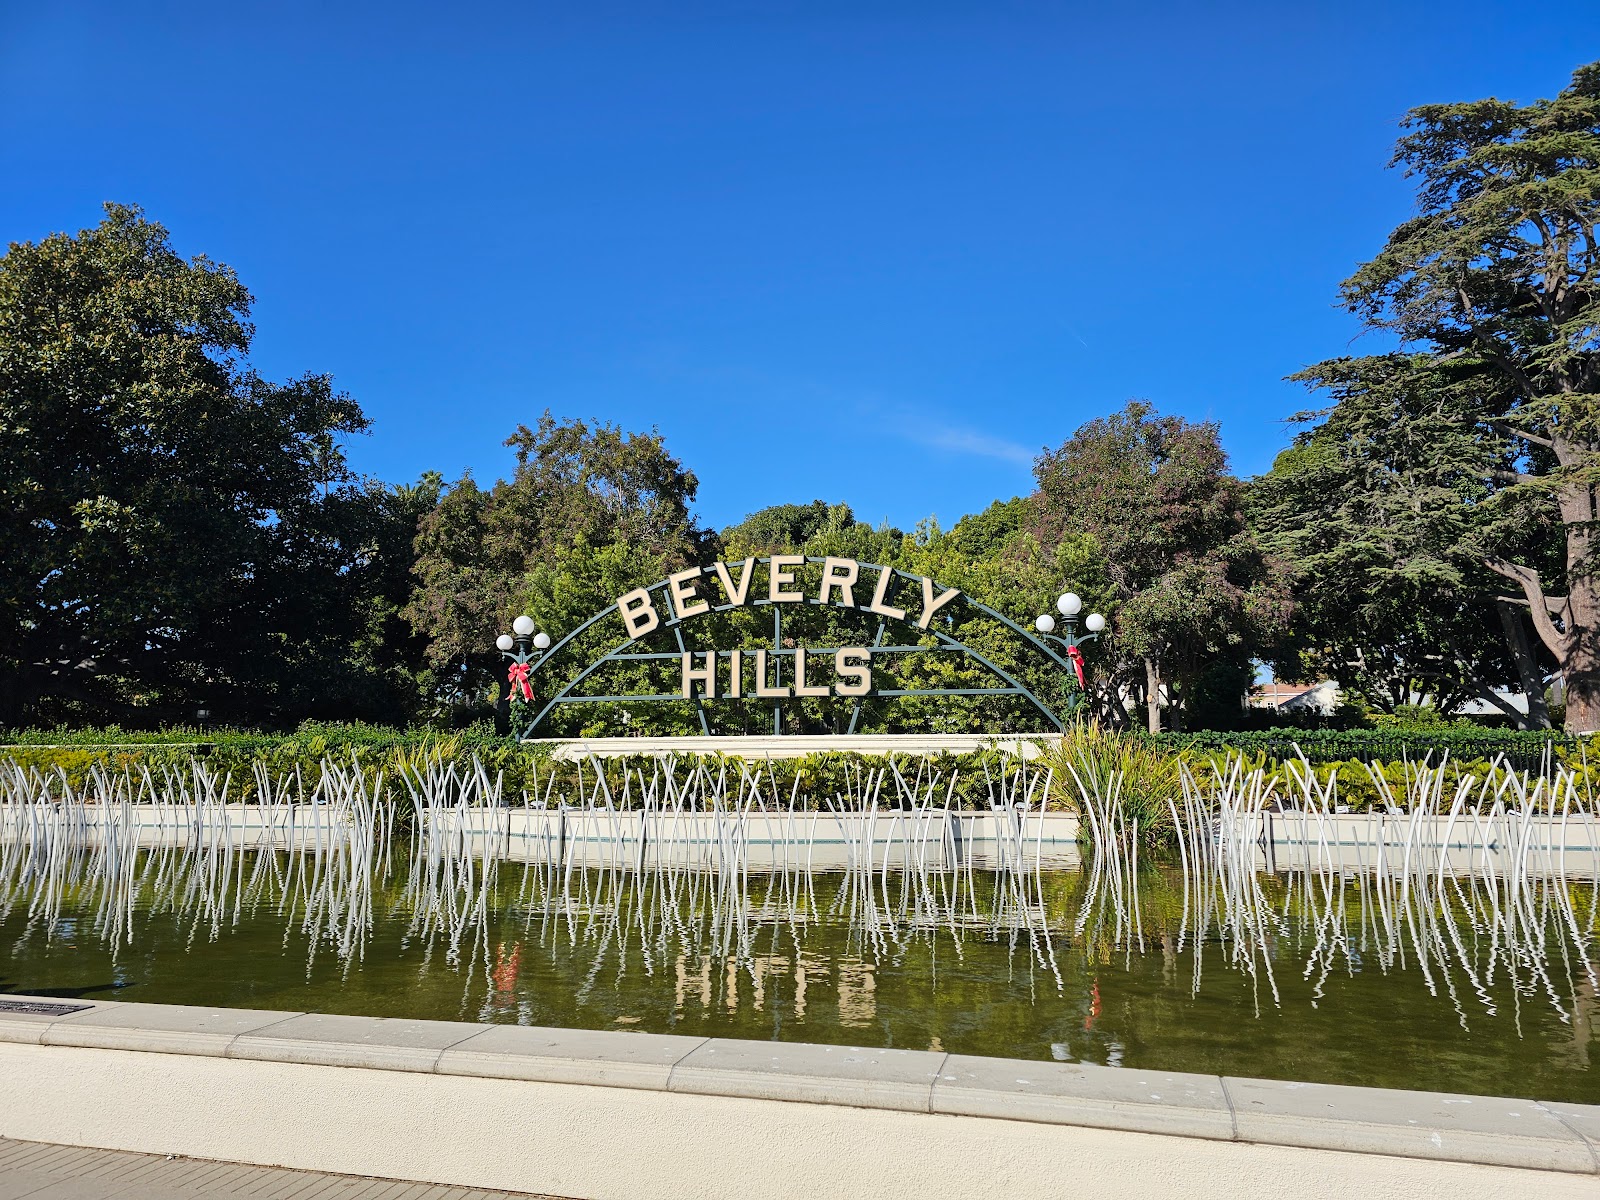 Beverly Hills Sign, Beverly Hills, California